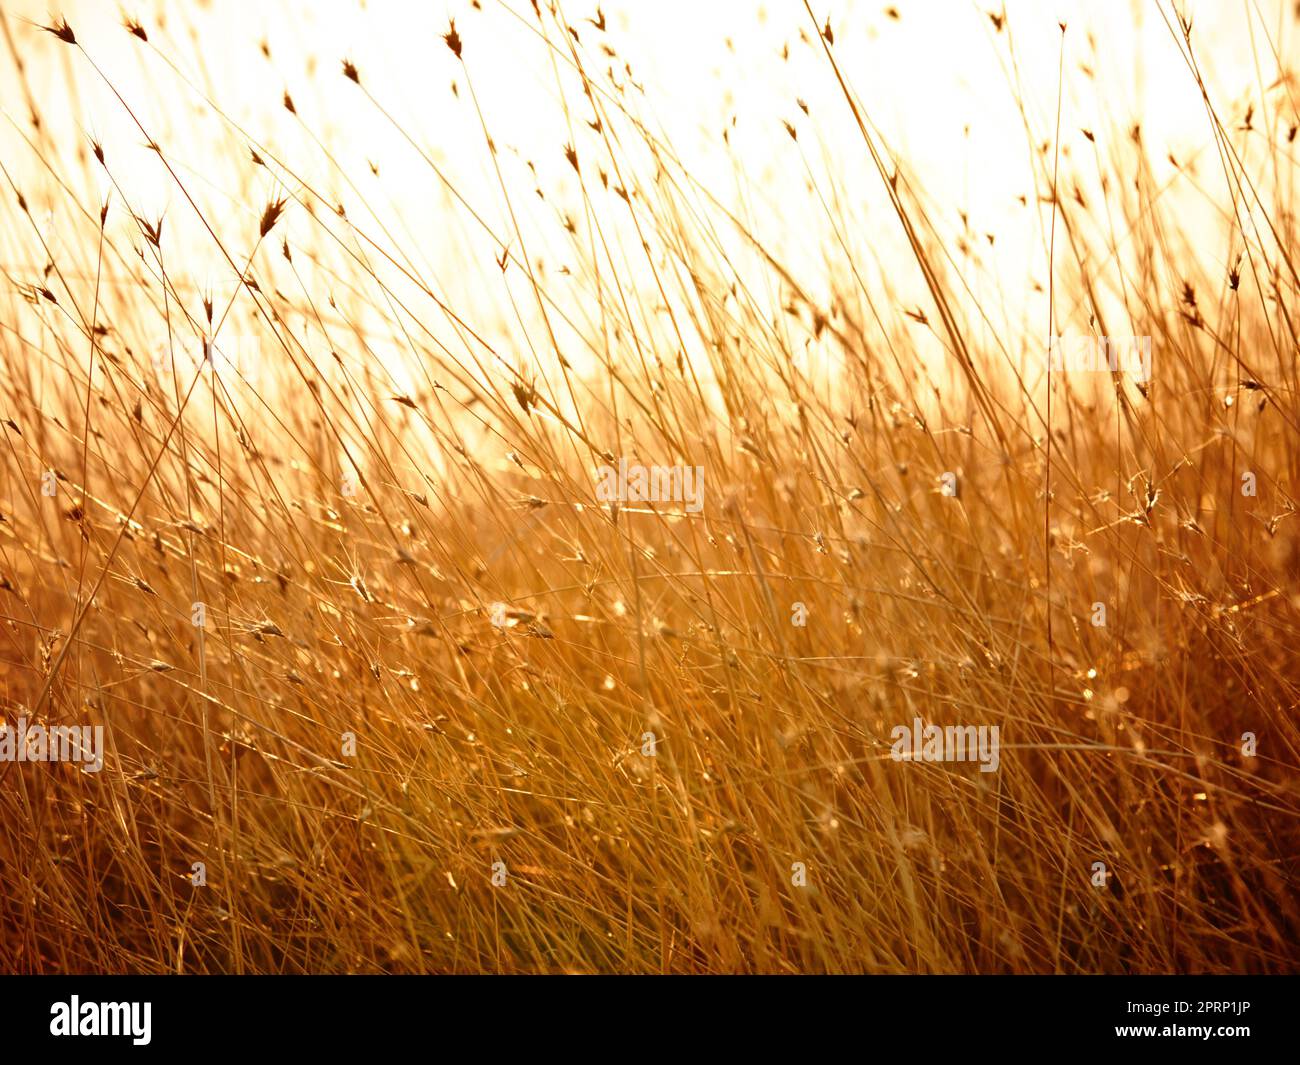 Wheat field texture or grass and sunshine with retro color for nature or landscape background. Corn field textures and orange plant growth near the countryside with wind, sunrise or sunset Stock Photo